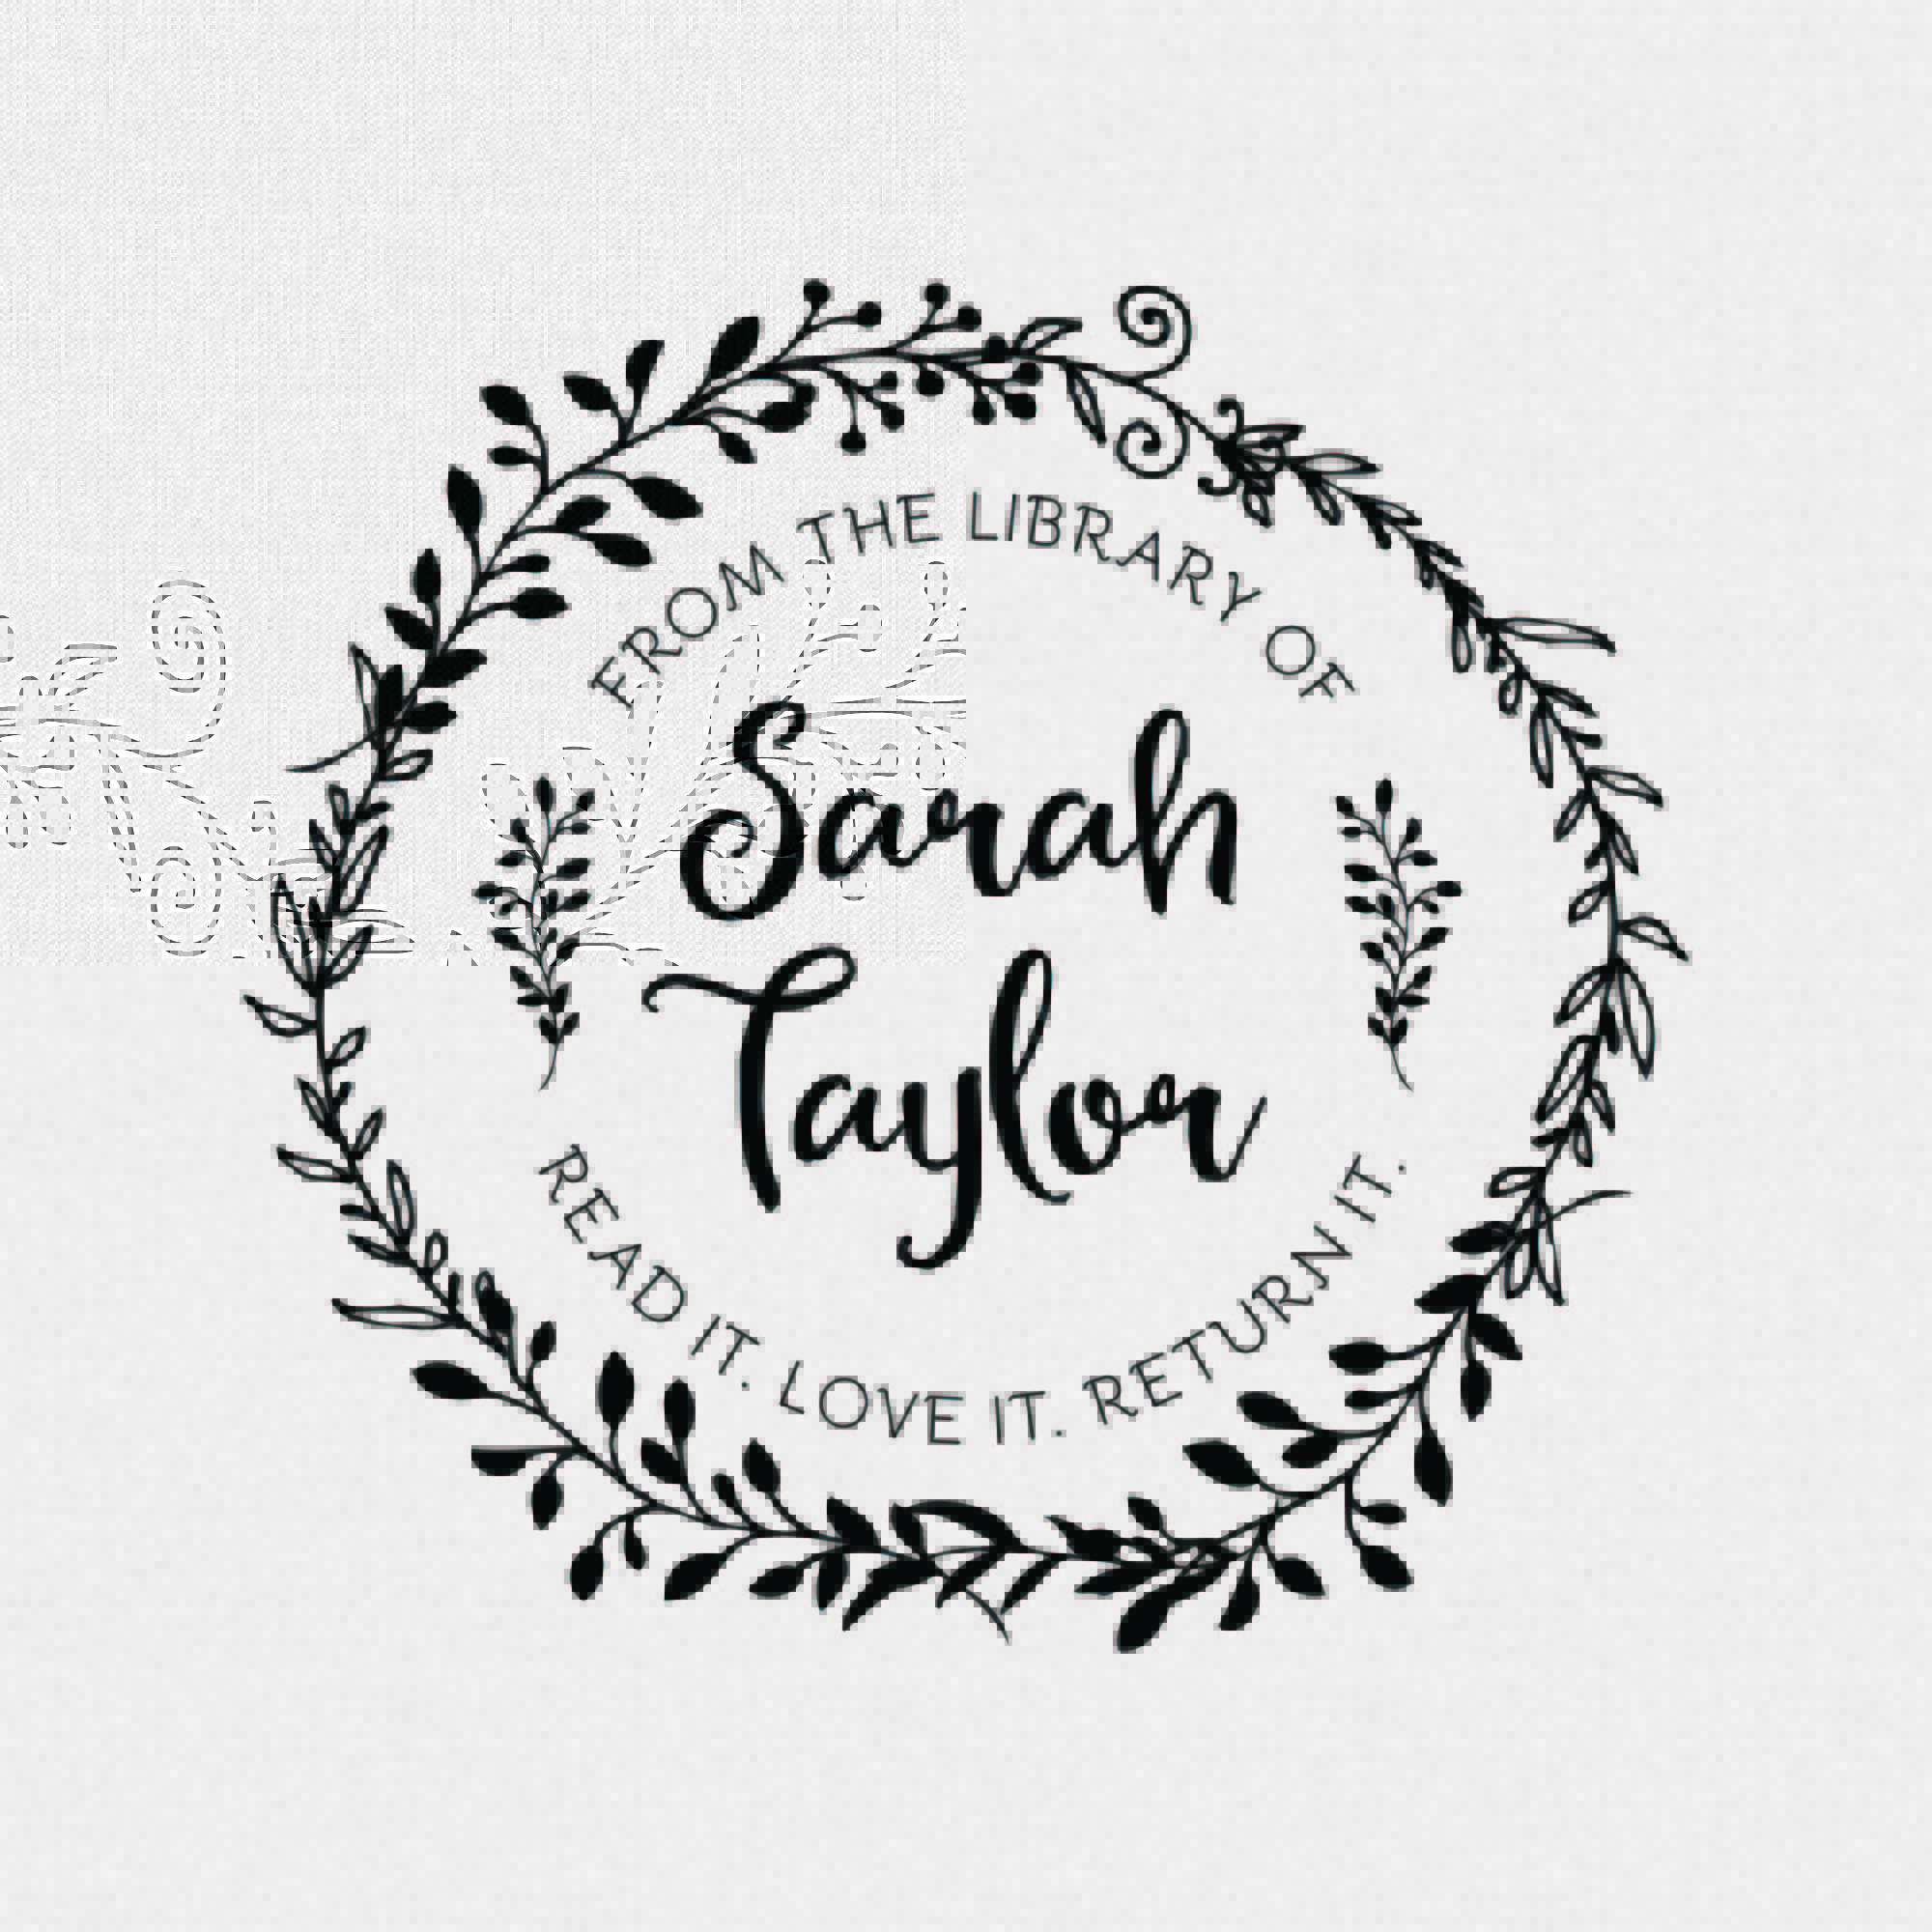 Personalized Rustic Library Stamp, Personalized Book Stamp, Library Book Stamp Sample, Floral, Outdoor, Garden, Laurel, Wreaths, Ex Libris - Style T812